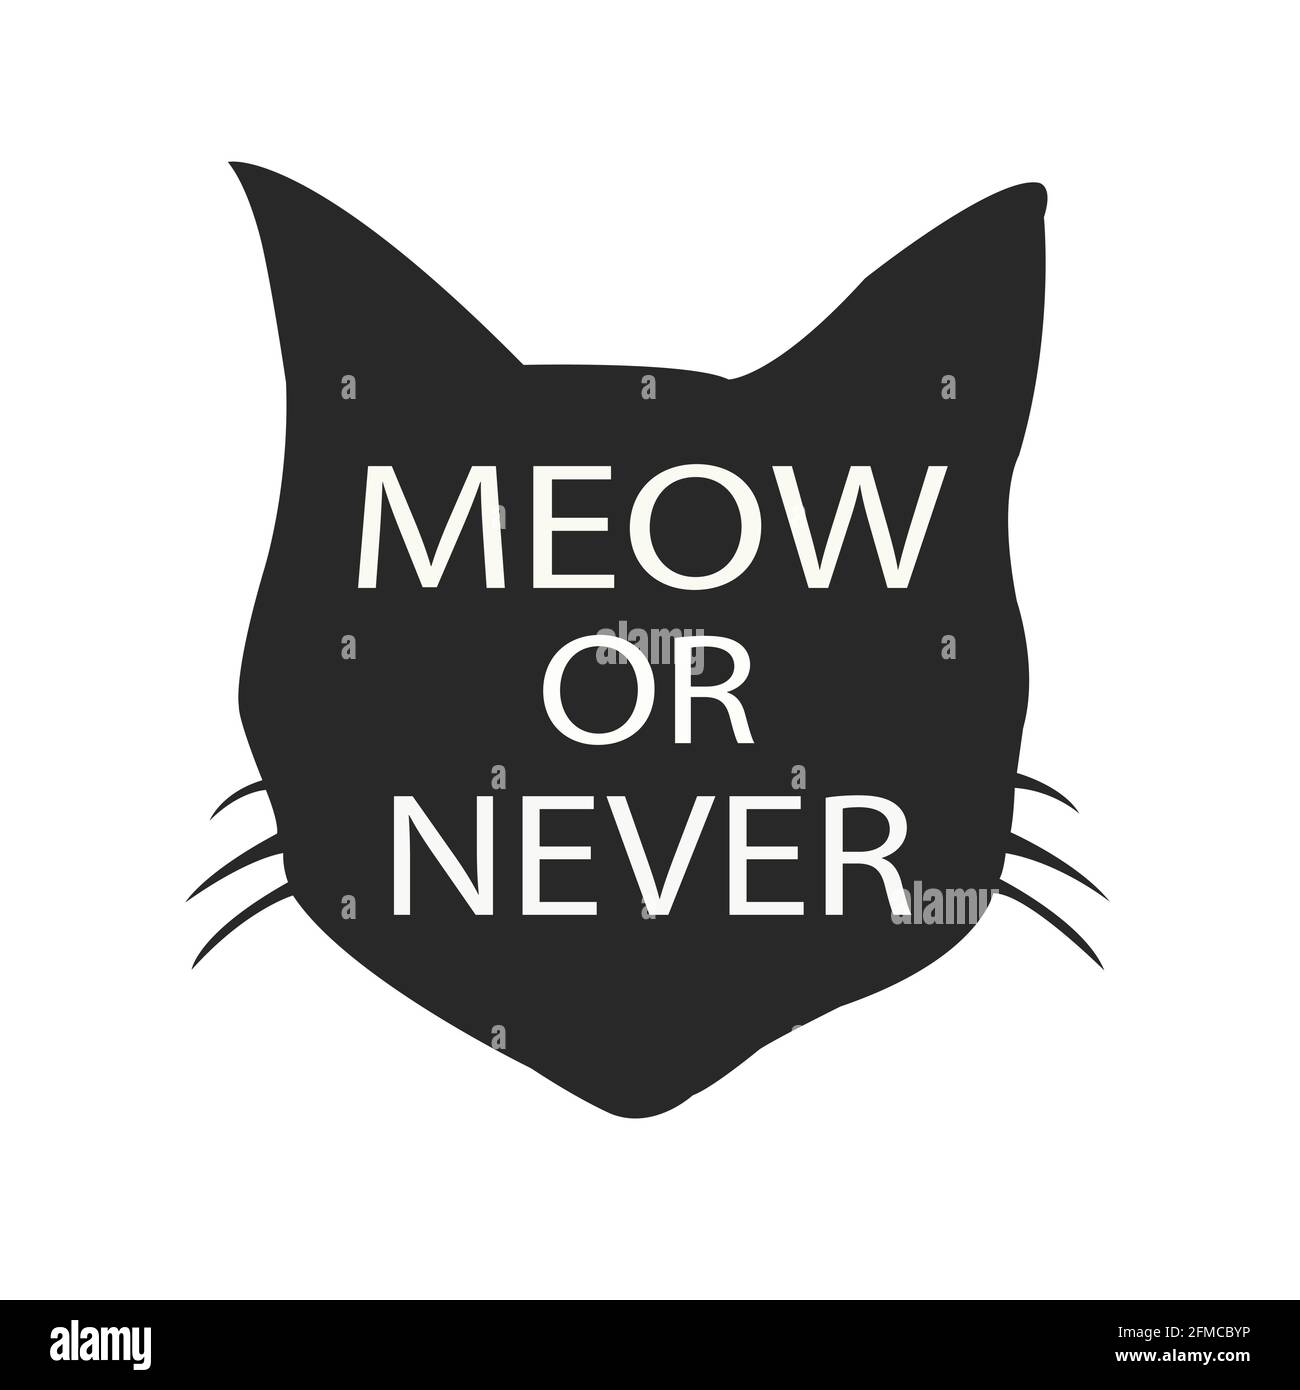 MEOW OR NEVER. A CAT VECTOR FOR T-SHIRT PRINT Stock Vector